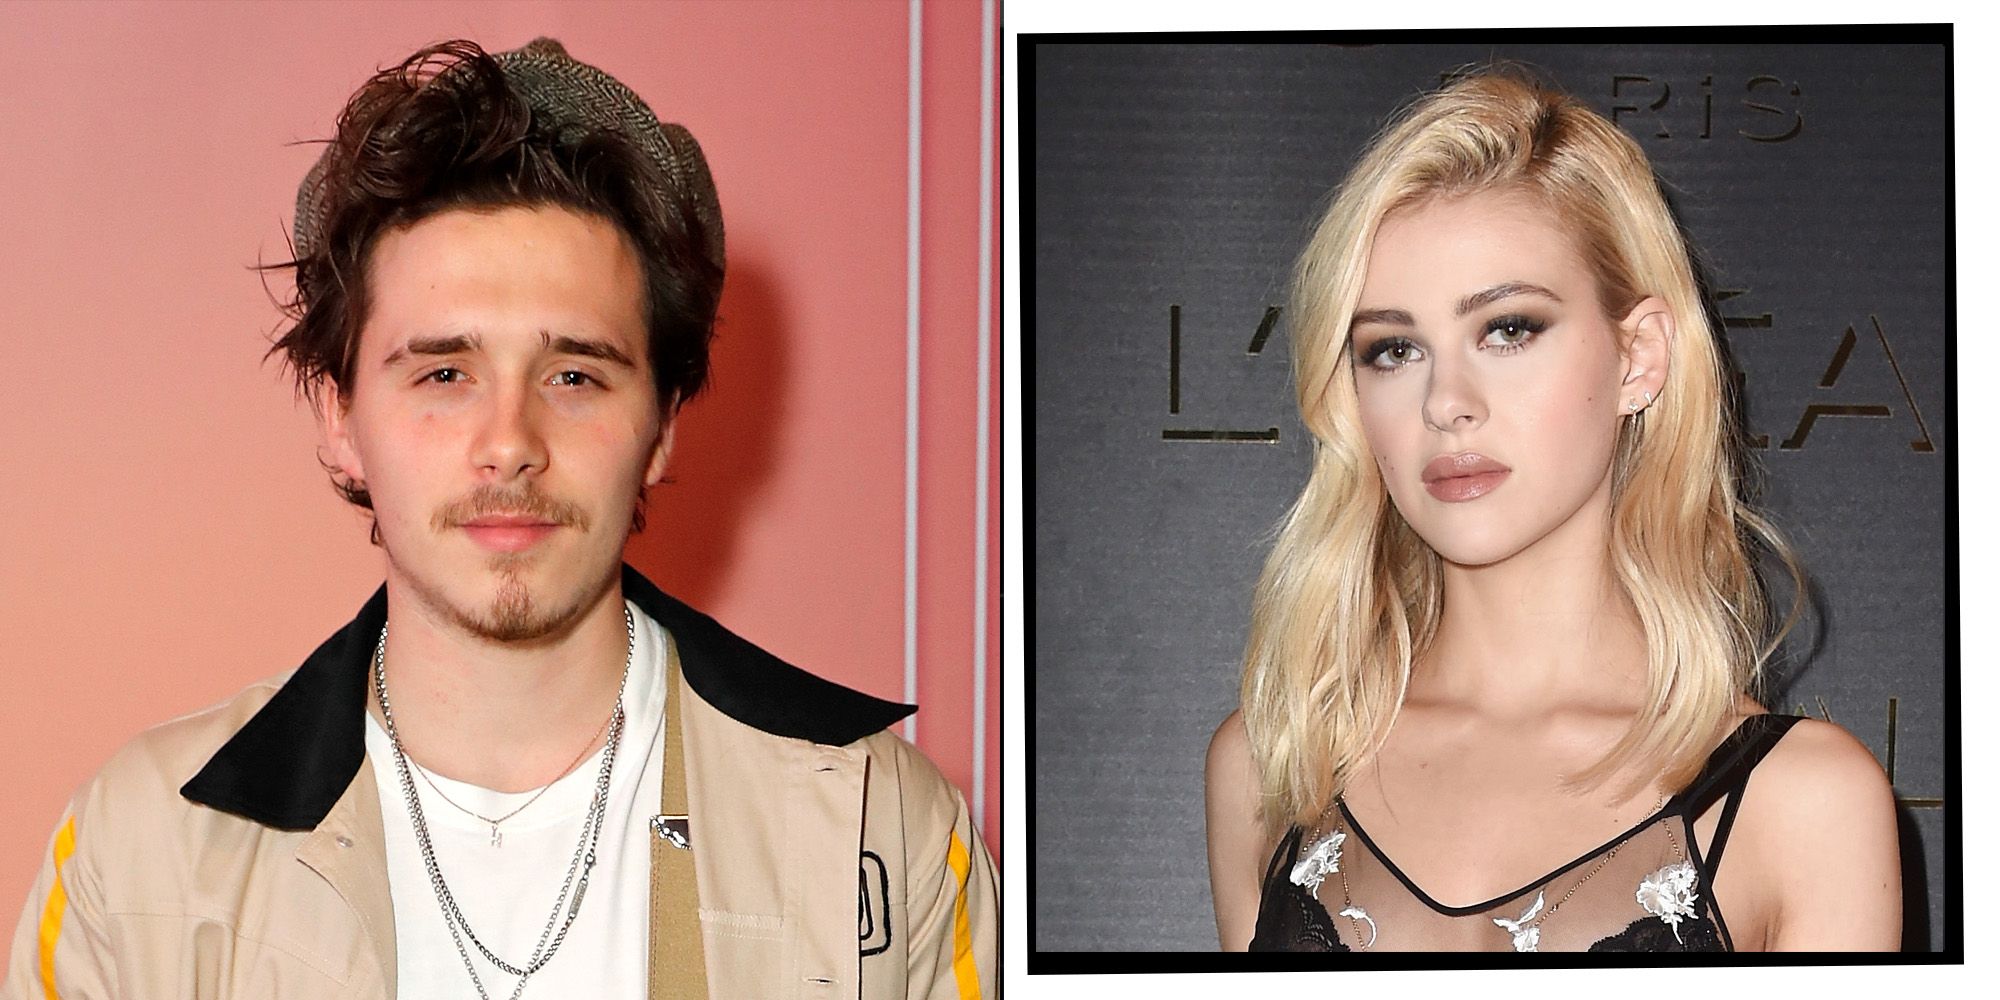 Brooklyn Beckham And Girlfriend Nicola Peltz's Relationship Timeline: From Dating To Marriage Proposal